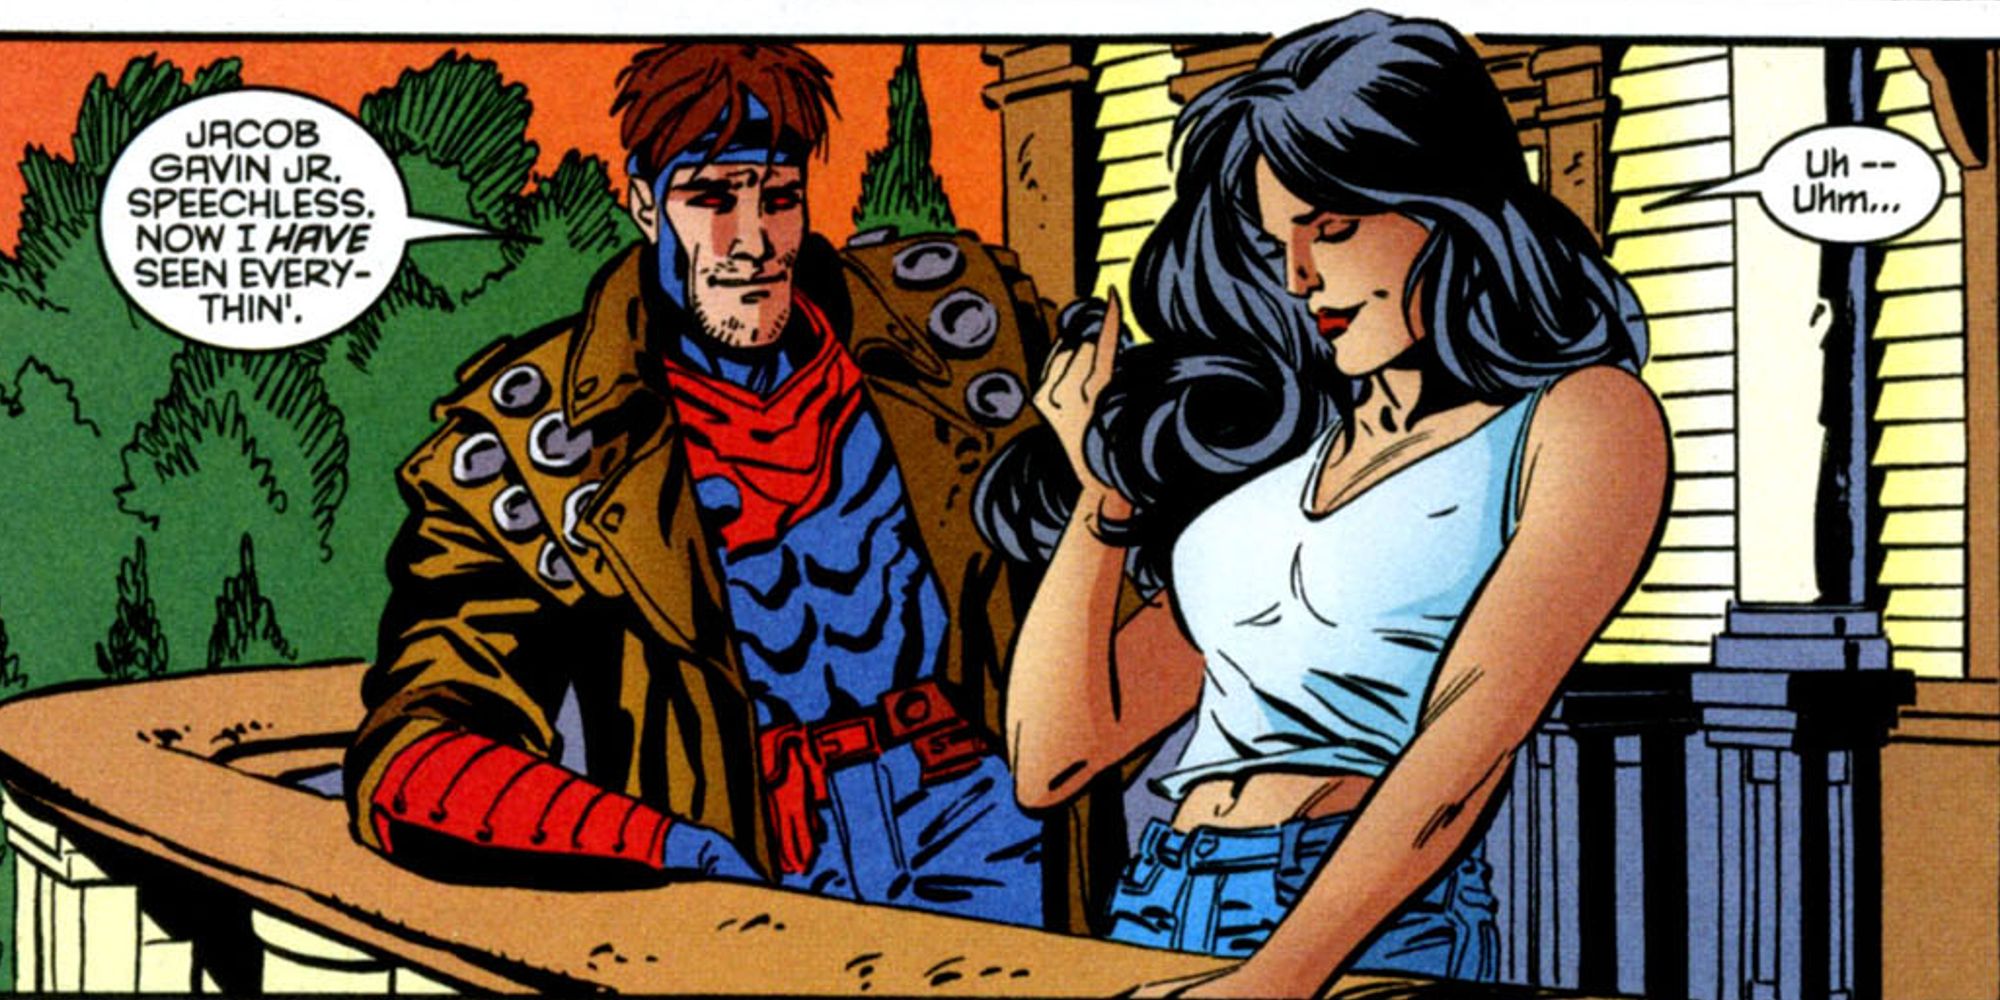 Gambit flirting with Jacob Gavin Jr. AKA Courier in her womanly form in Gambit 24